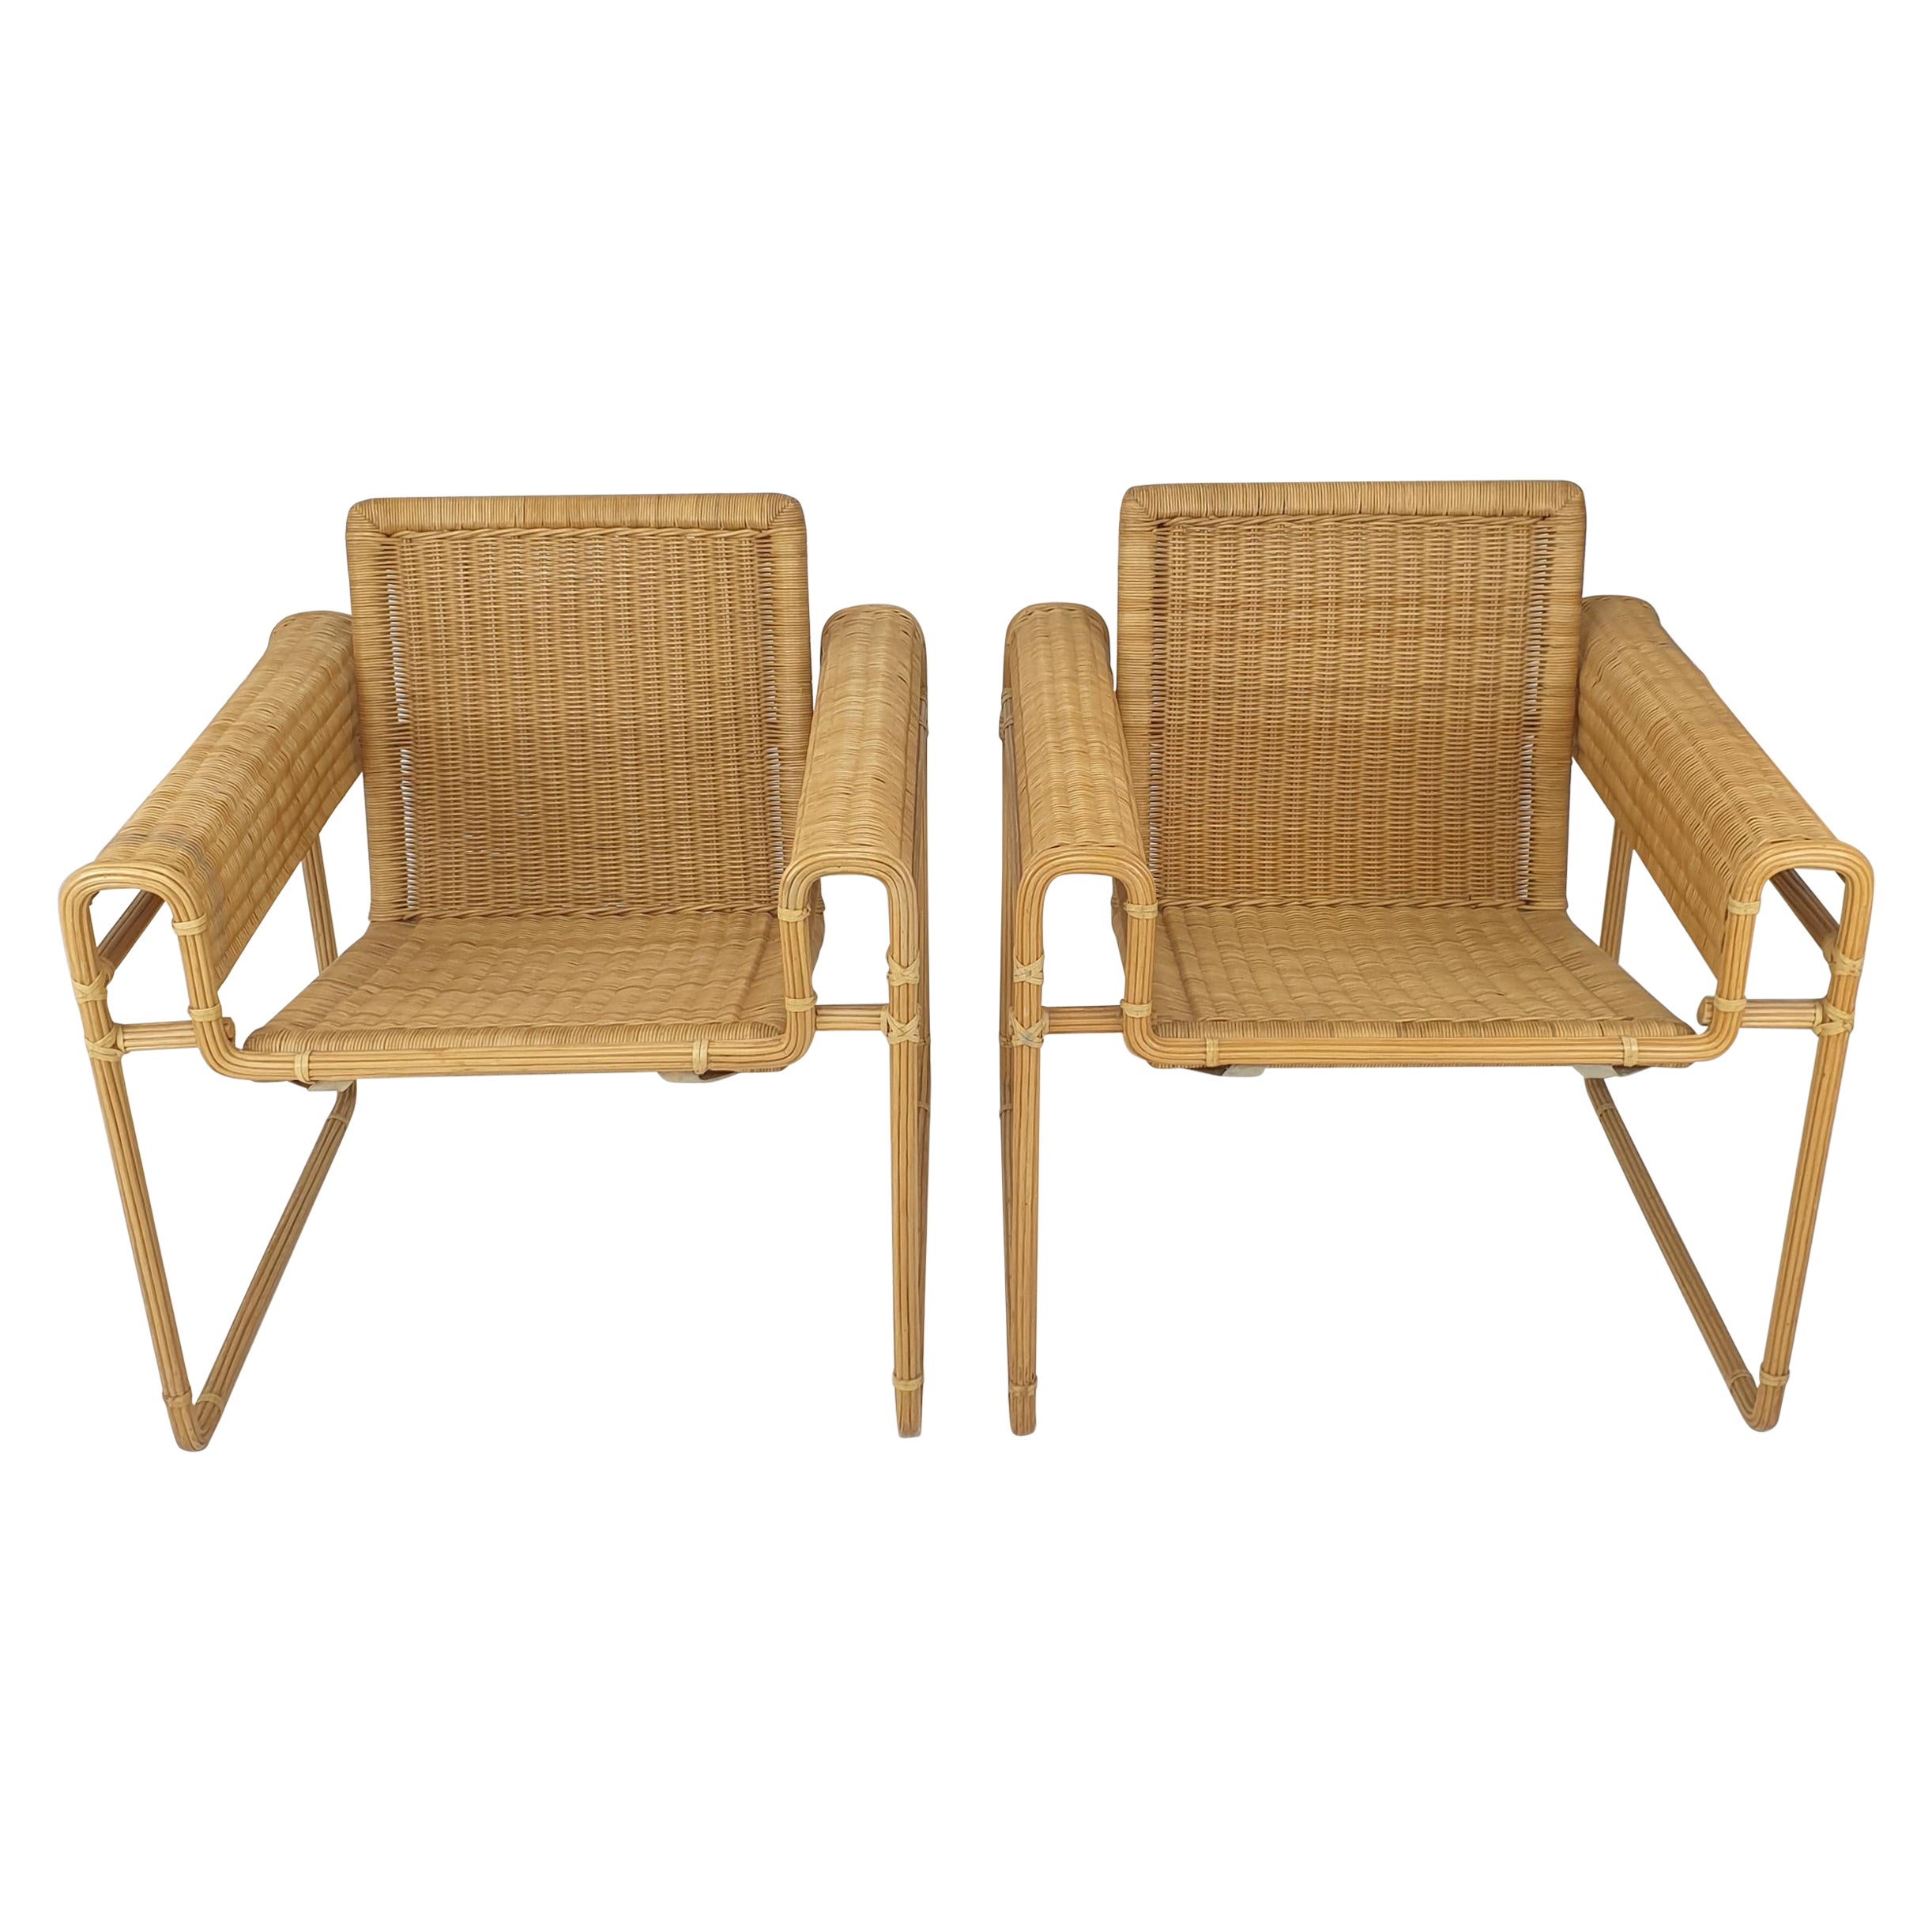 Set of 2 Dutch Wicker Chairs, 1970's For Sale